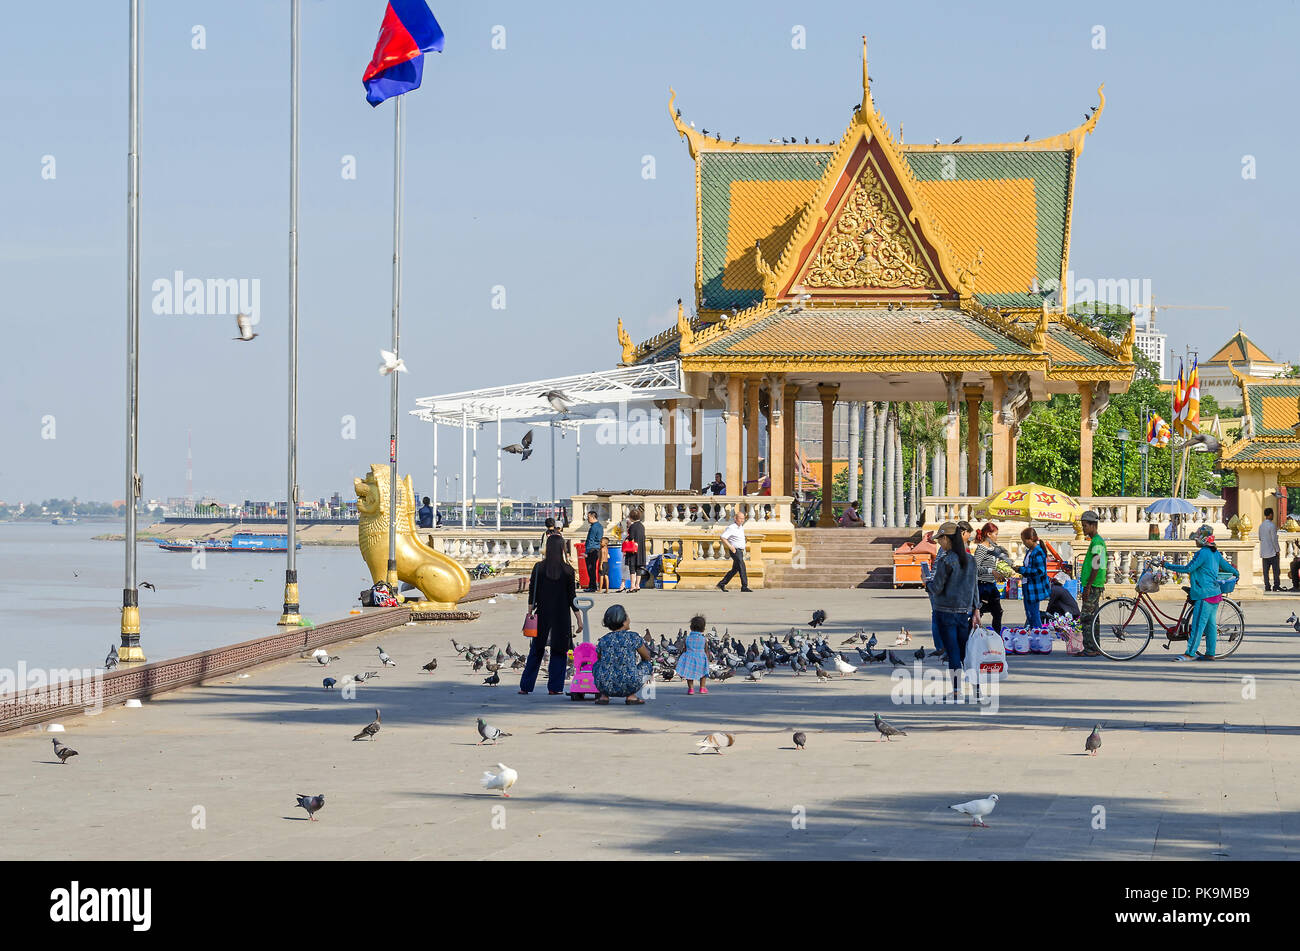 Phnom Penh, Cambodia - April 9, 2018: Preah Sisowath Quay, a riverside public promenade along the  Tonle Sap river with an open space in front of the  Stock Photo